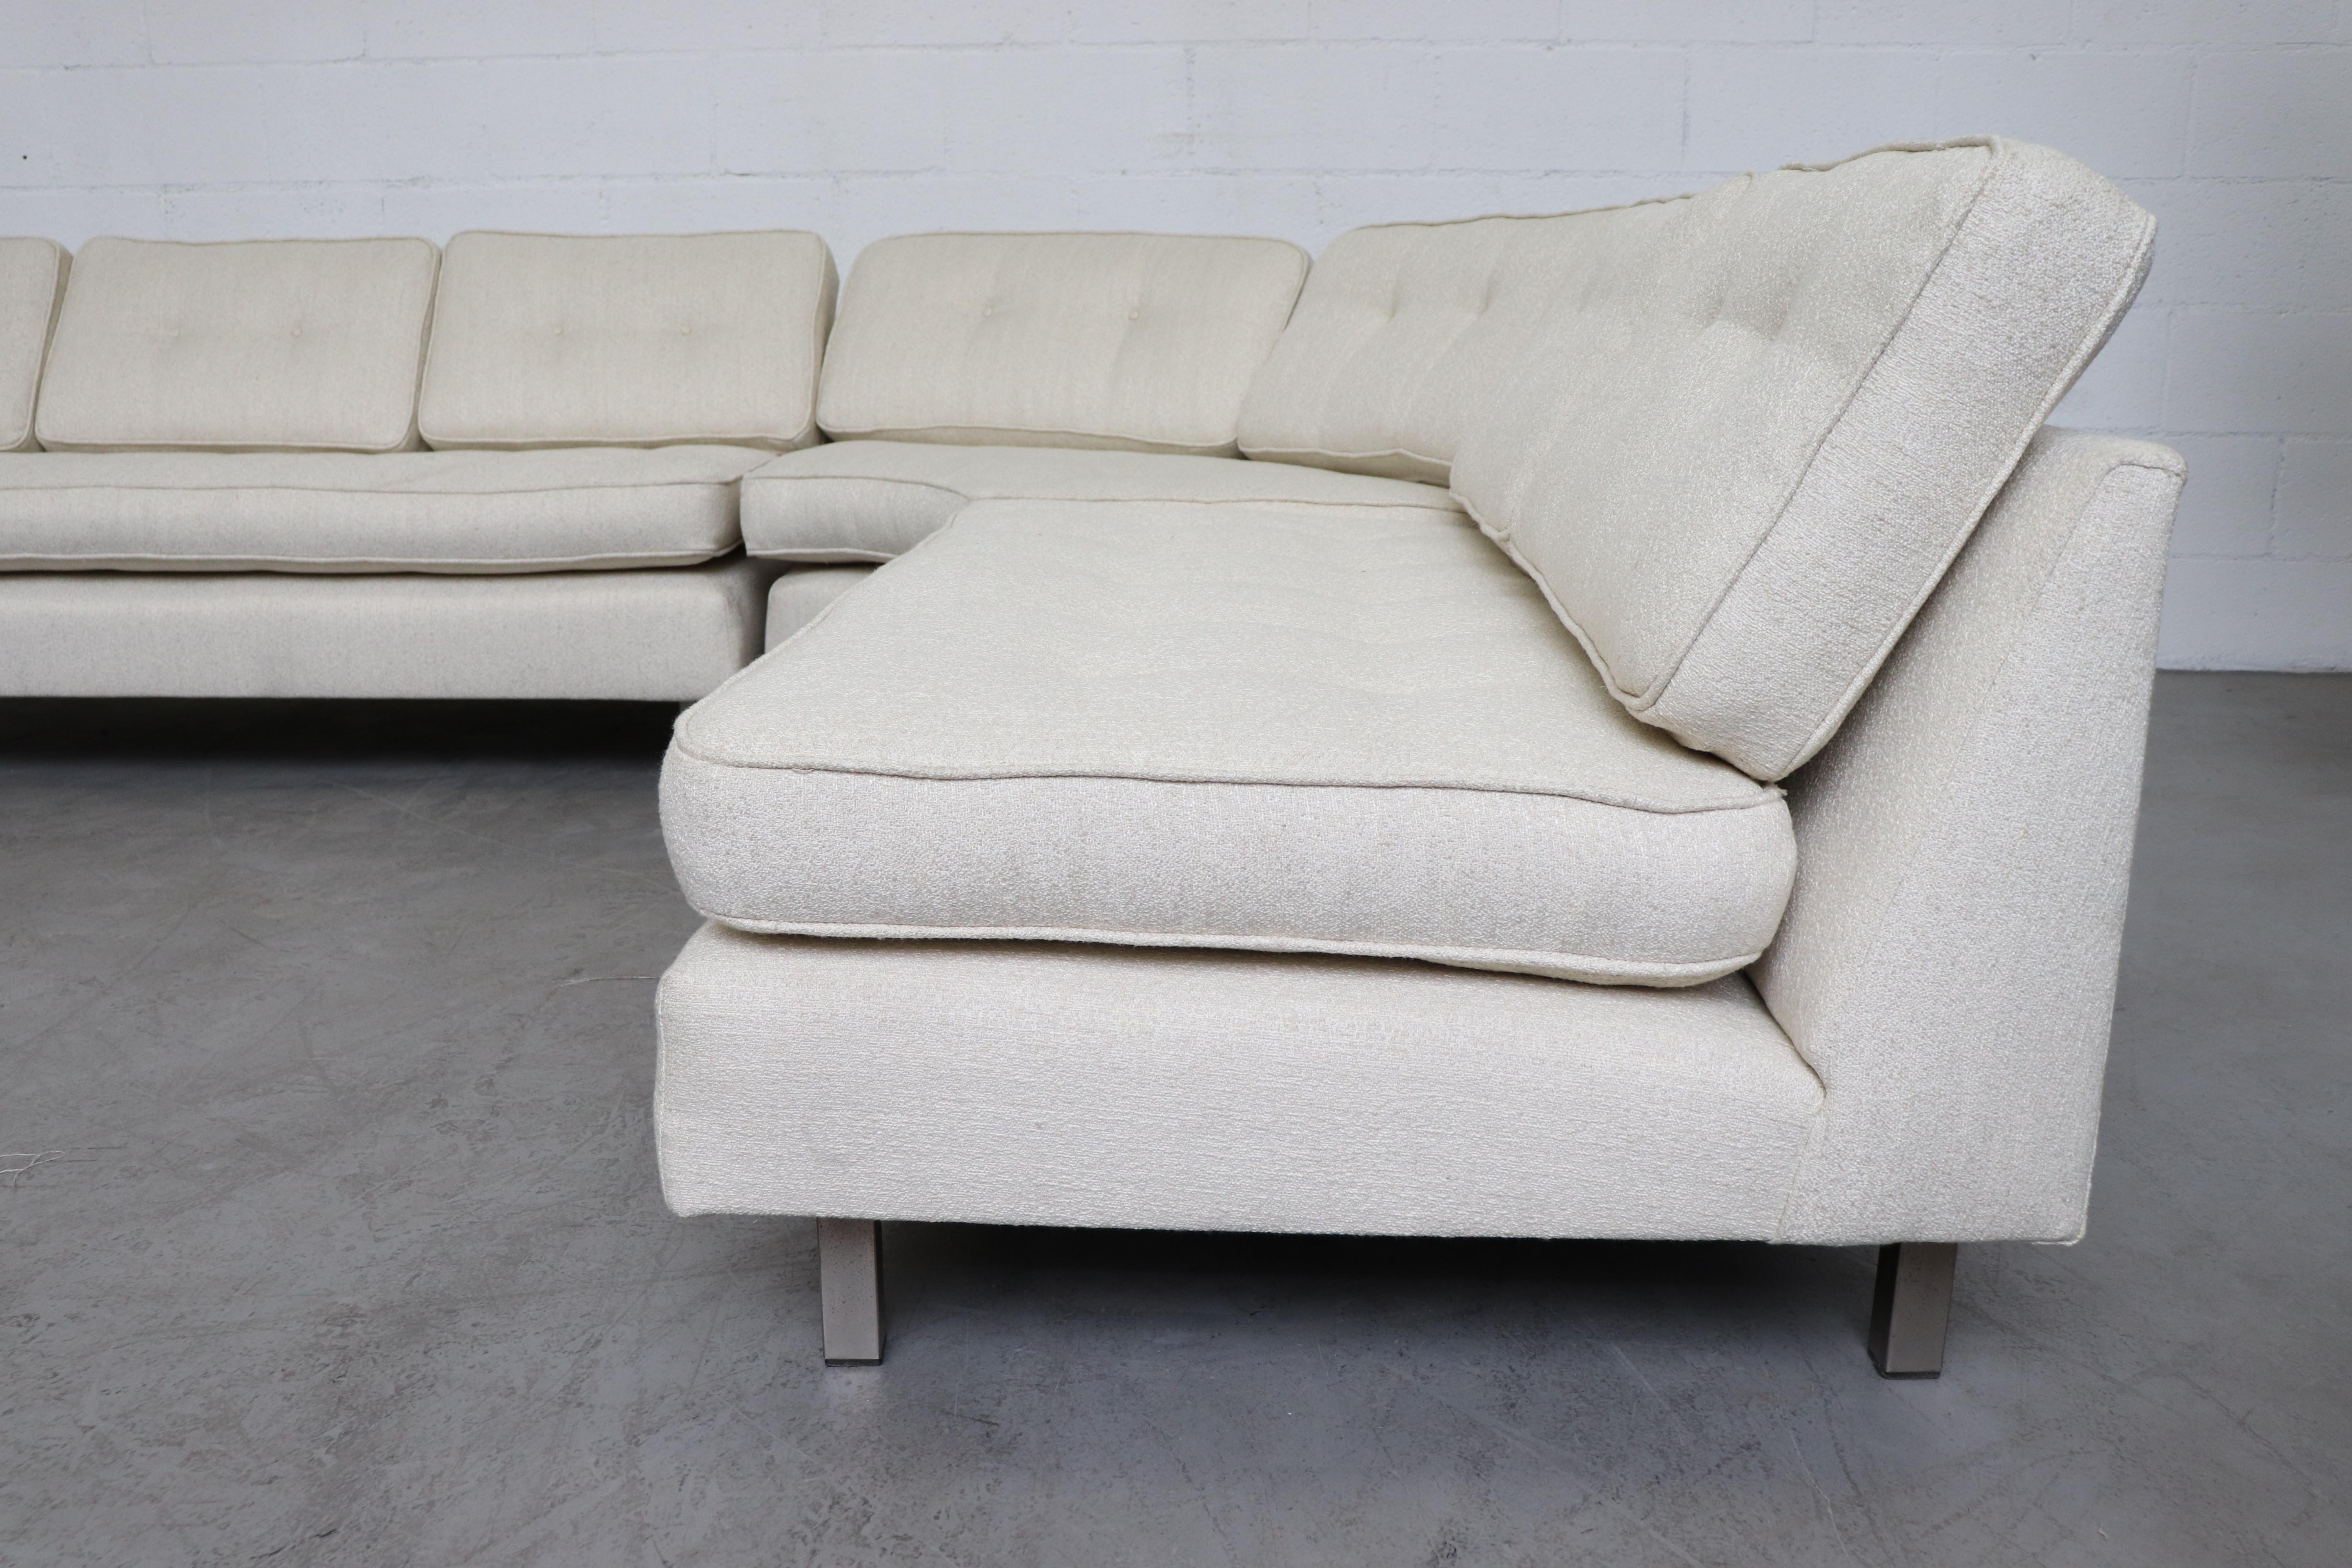 Mid-20th Century Artifort 3-Piece Sectional Sofa by Geoffrey Harcourt